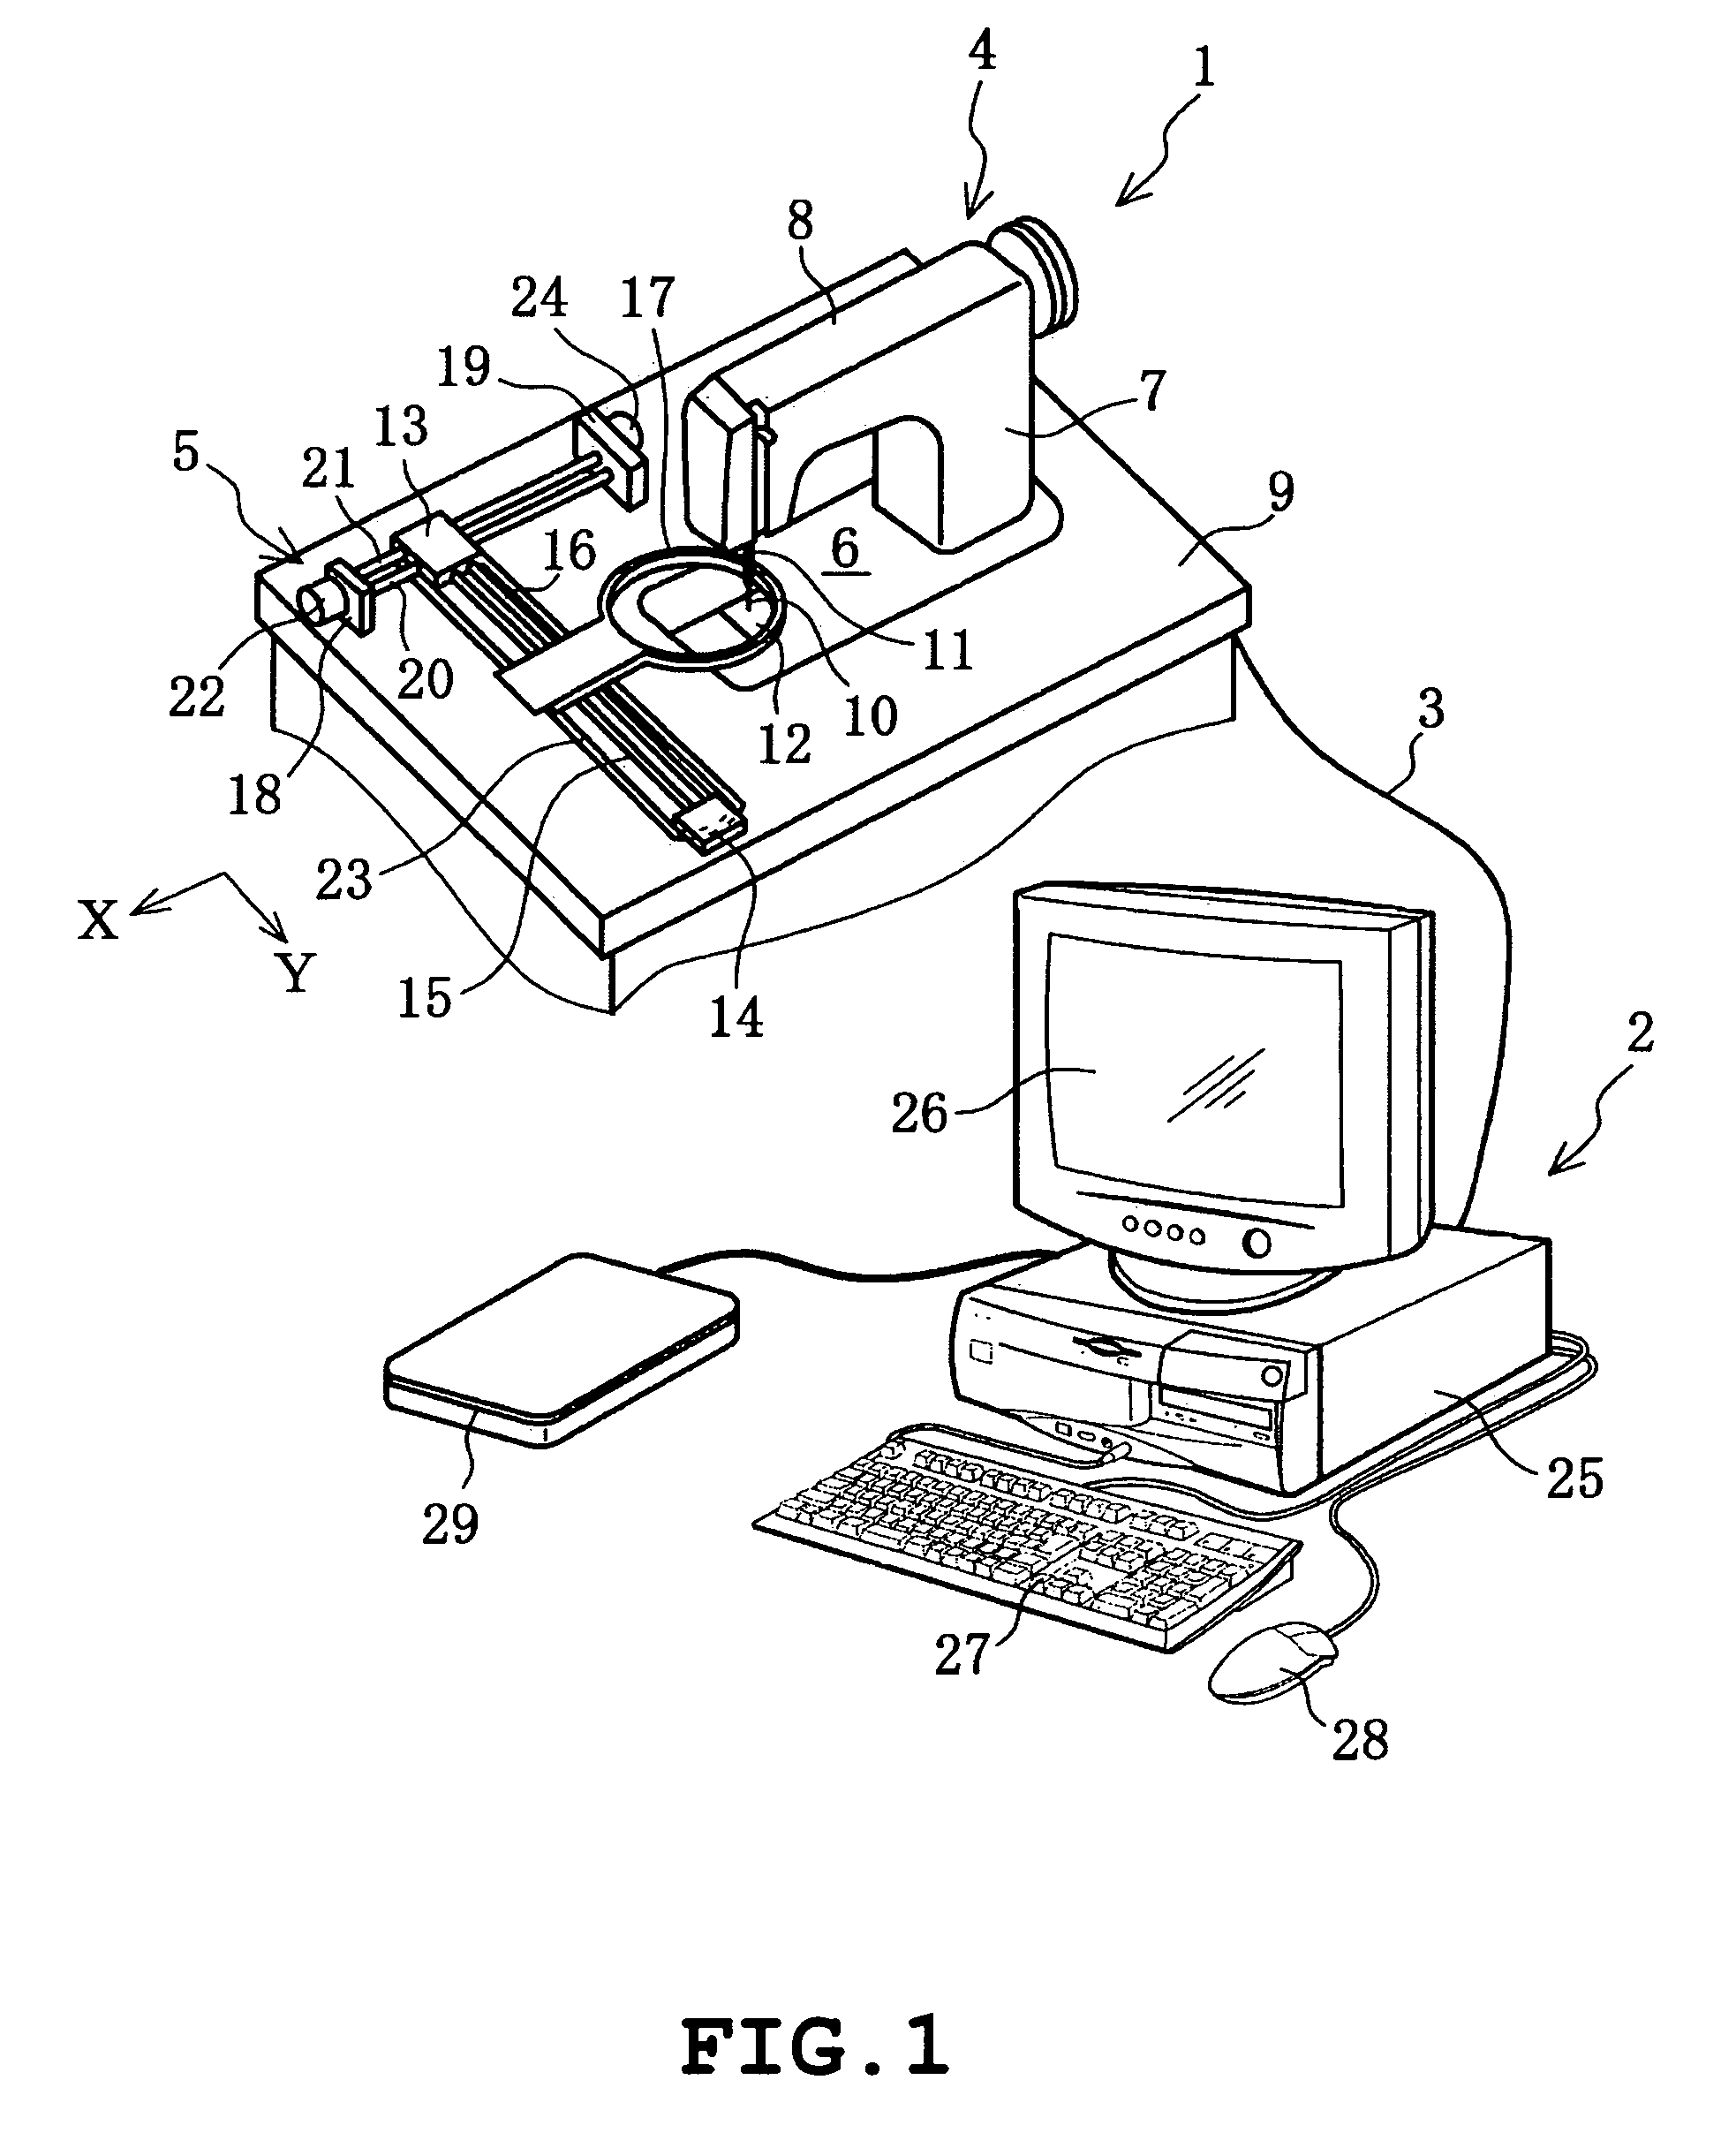 Embroidery data producing device and embroidery data producing program stored in a computer readable medium